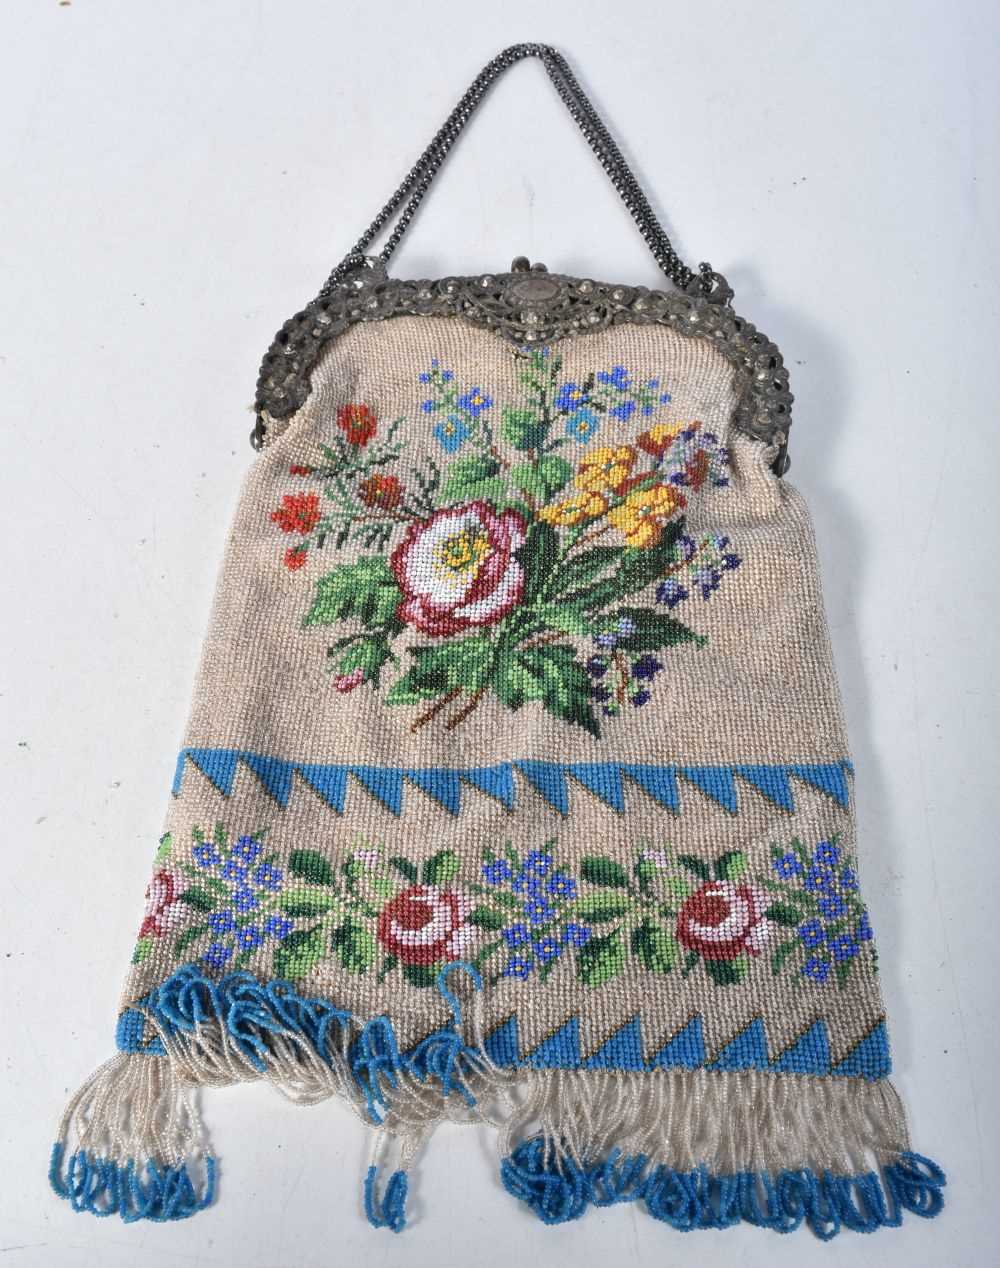 Antique Victorian micro beaded evening purse with glass seed beads and white metal mounts.  27cm x